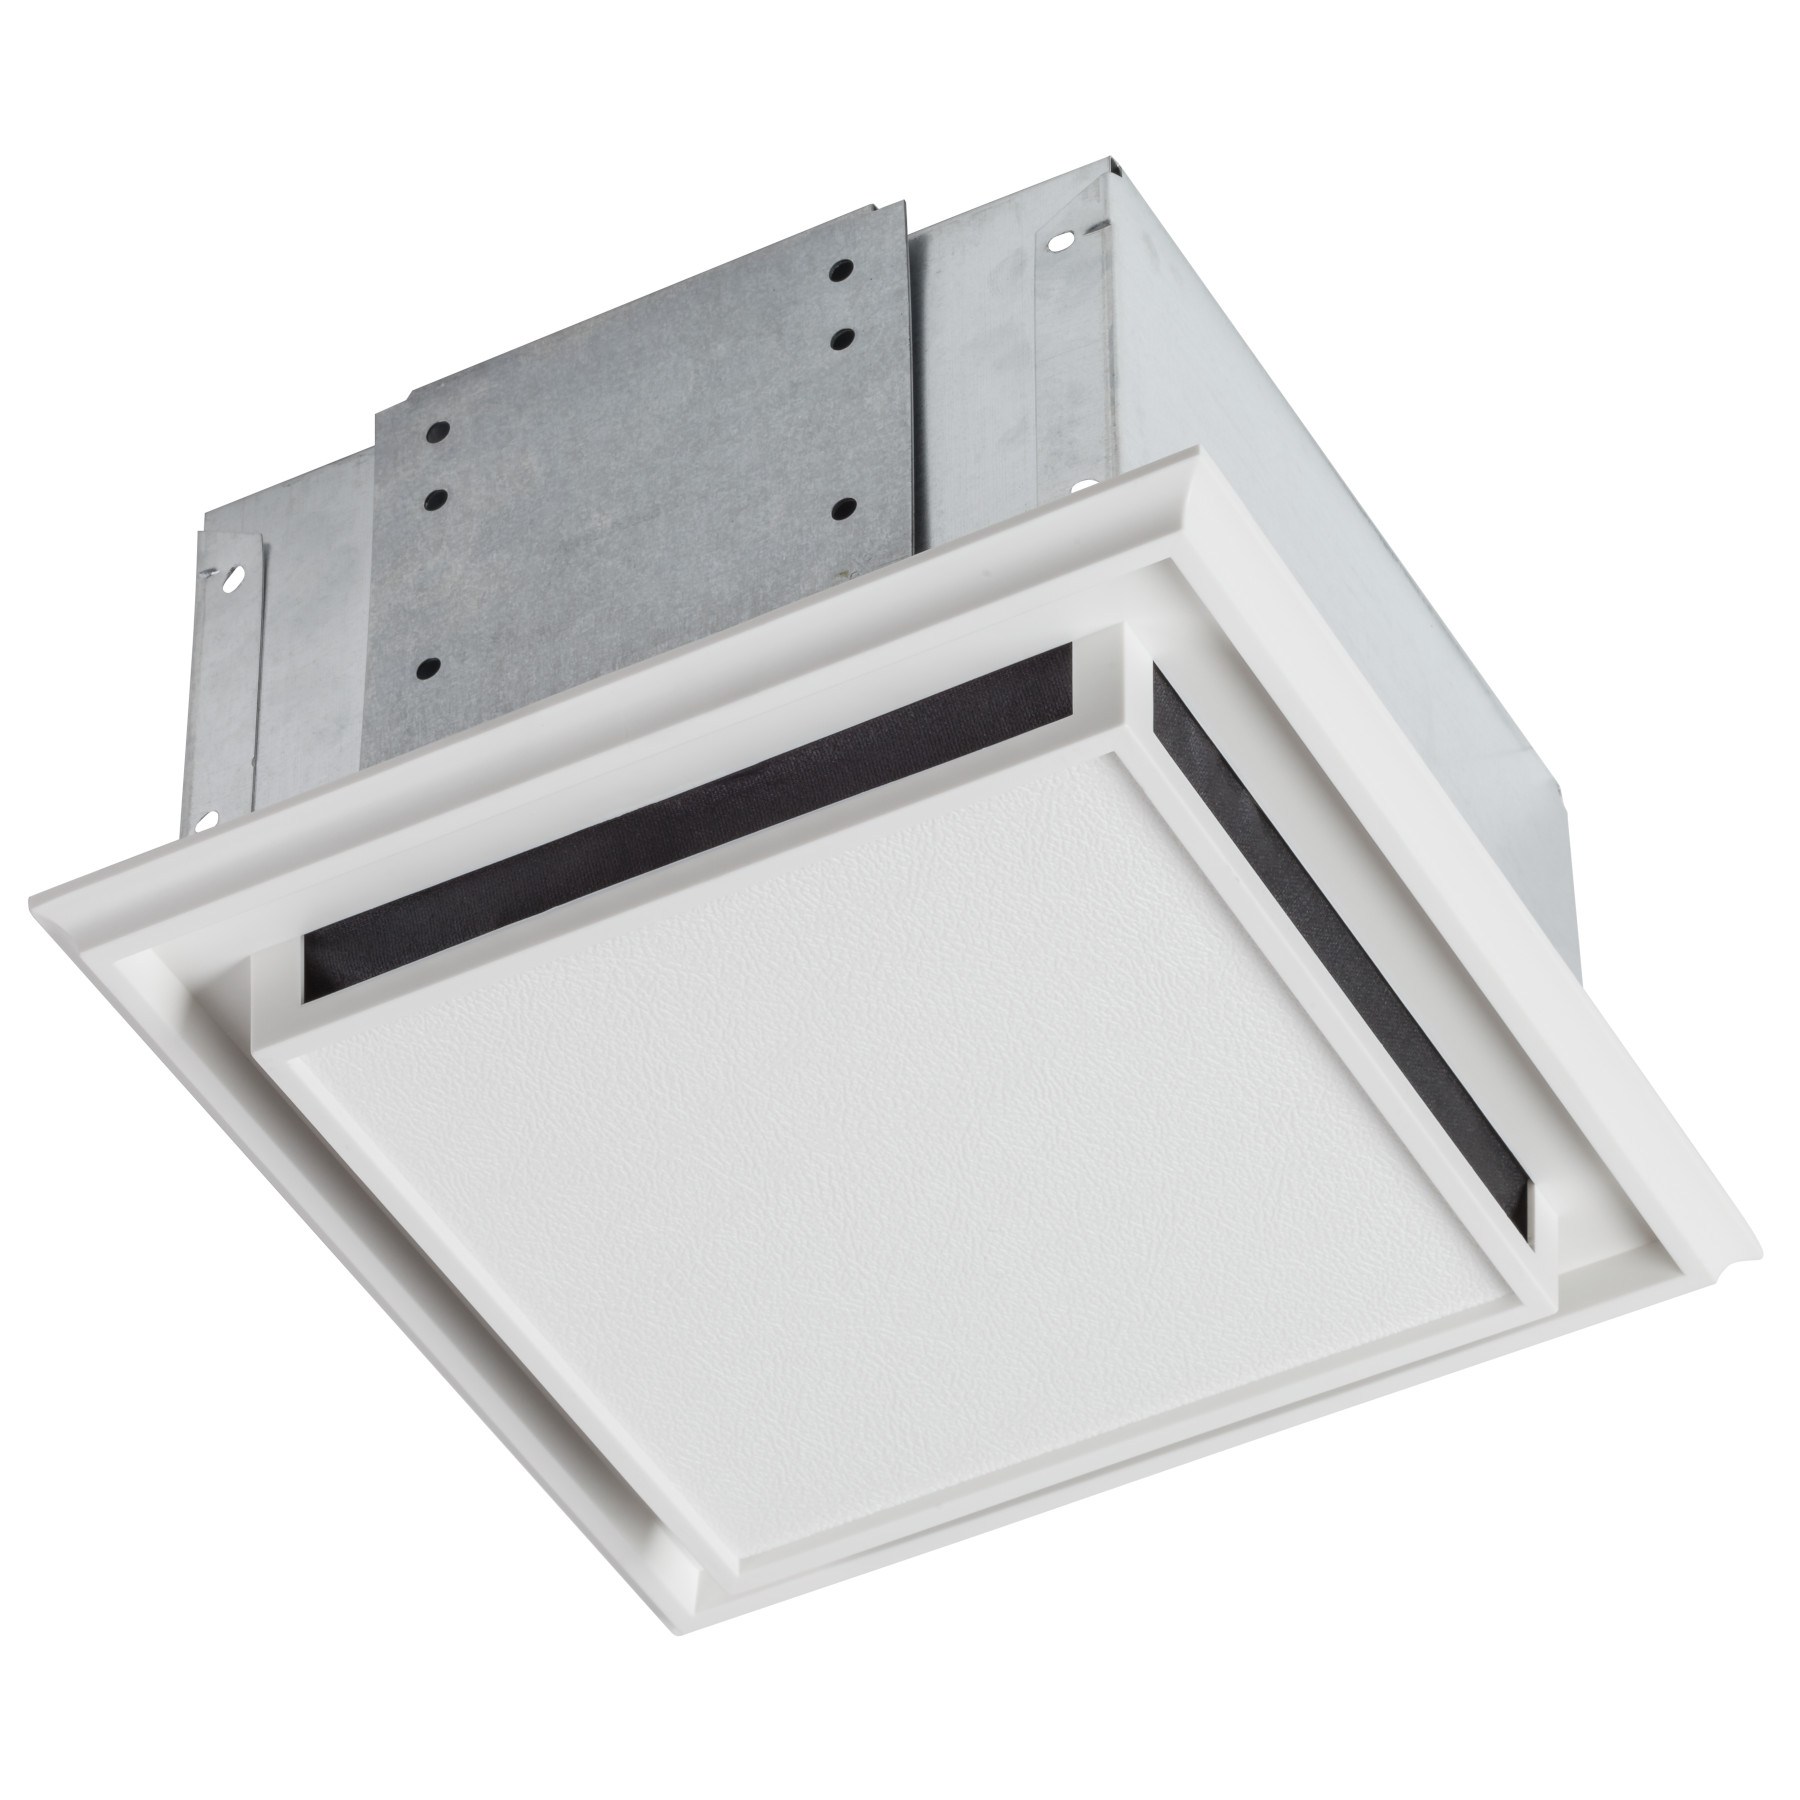 Broan® Duct-free Ventilation Fan with plastic grille, snap-in mounting and charcoal filter